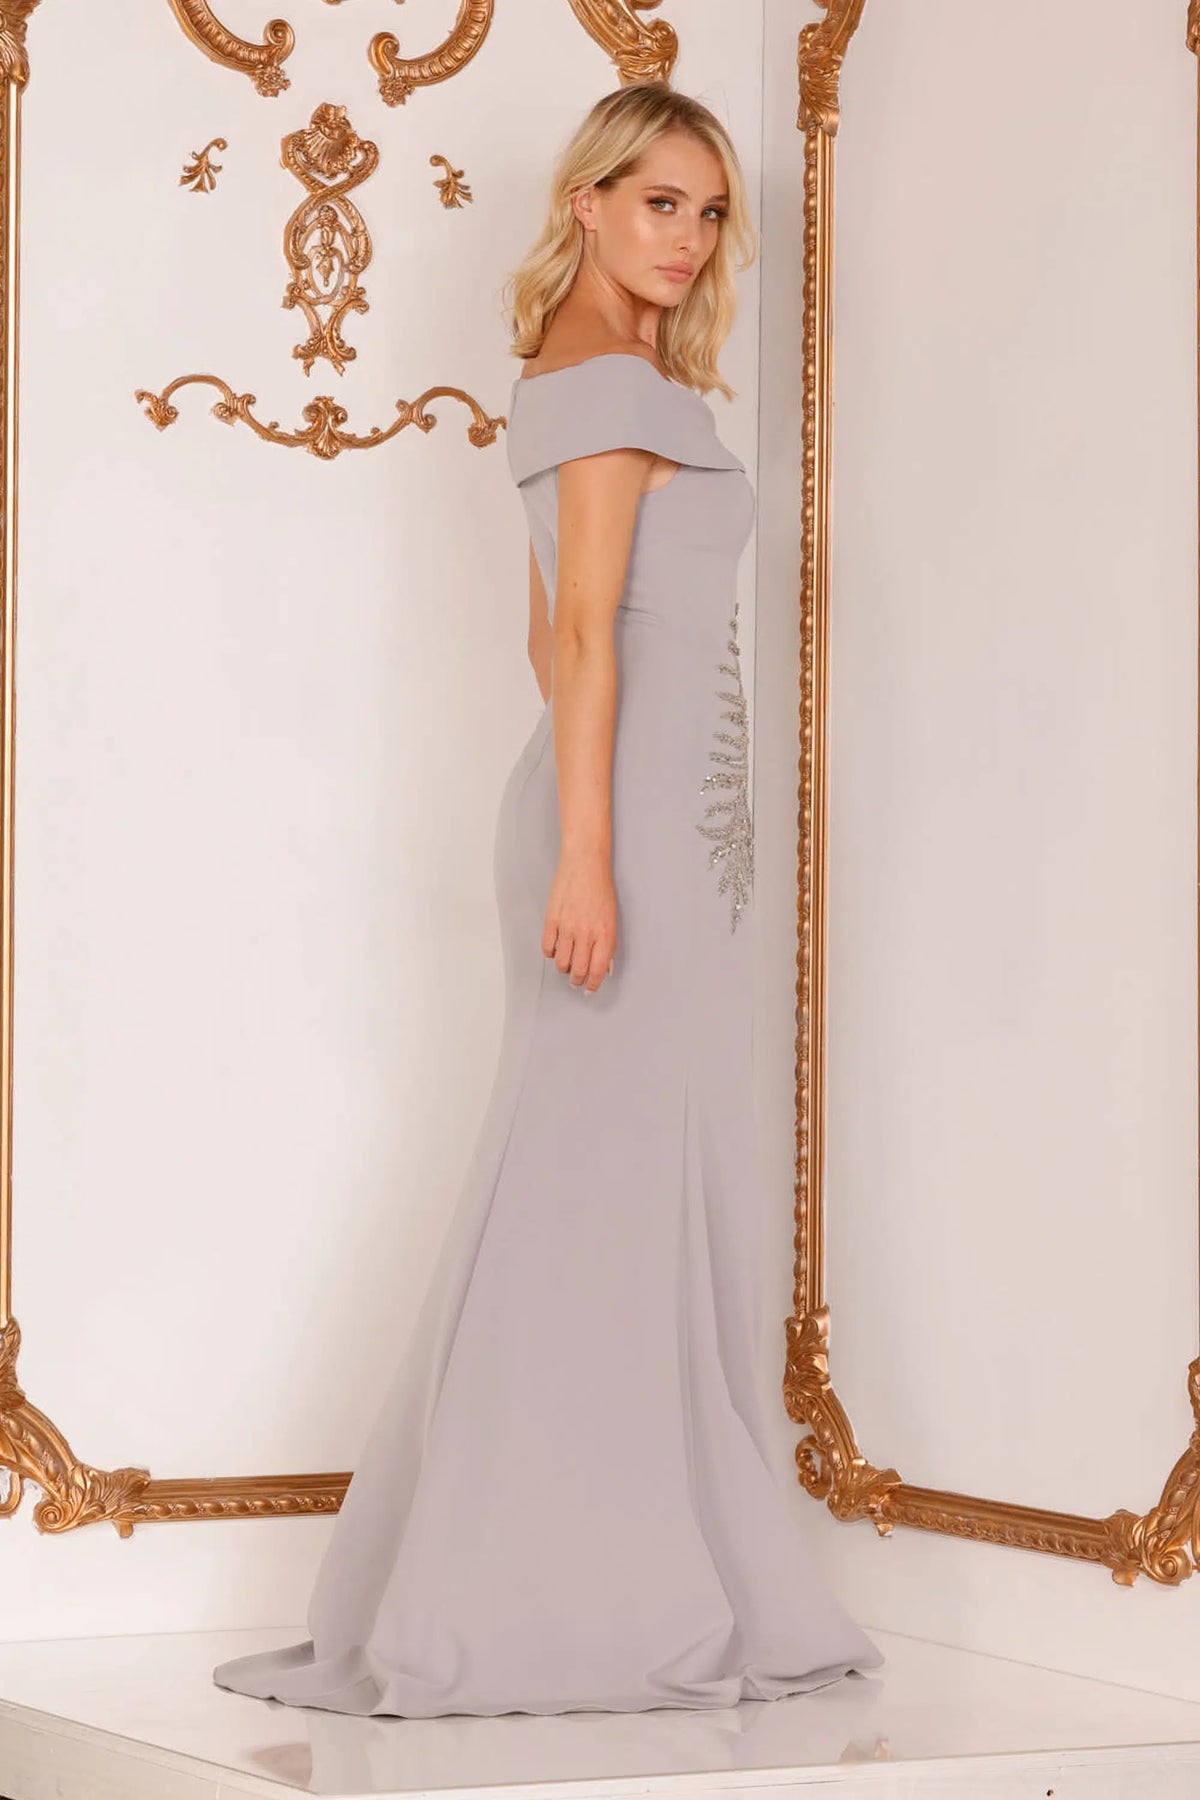 Make a statement in this stunning Terani Couture off-shoulder mother of the bride dress. The trumpet cut, asymmetrical crystal embellishments, and side slit create a glamorous silhouette. Perfect for any formal occasion. Sold by Madeline's Boutique in Toronto, Canada and Boca Raton, Florida